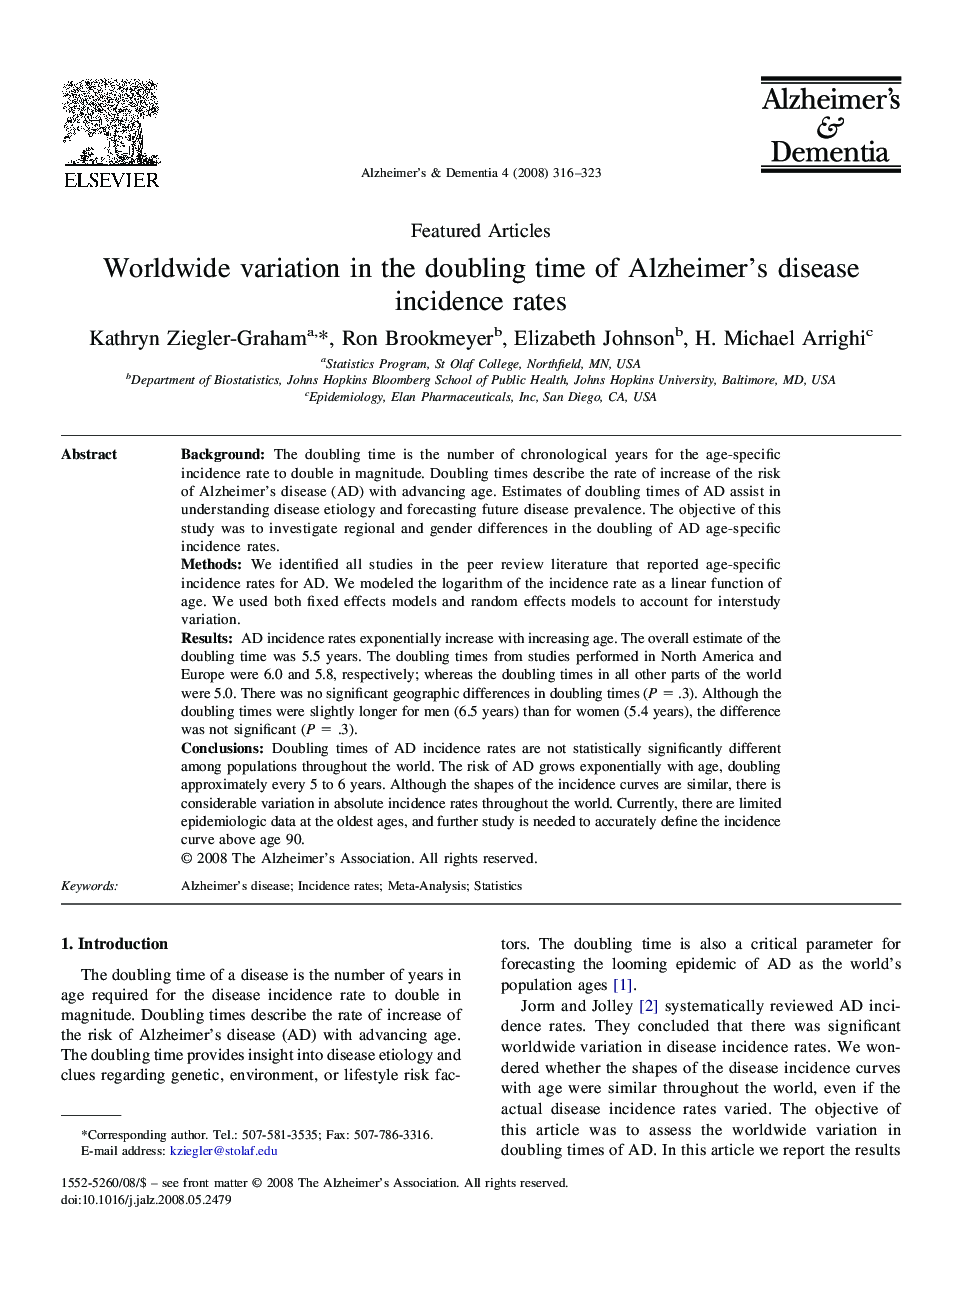 Featured articleWorldwide variation in the doubling time of Alzheimer's disease incidence rates